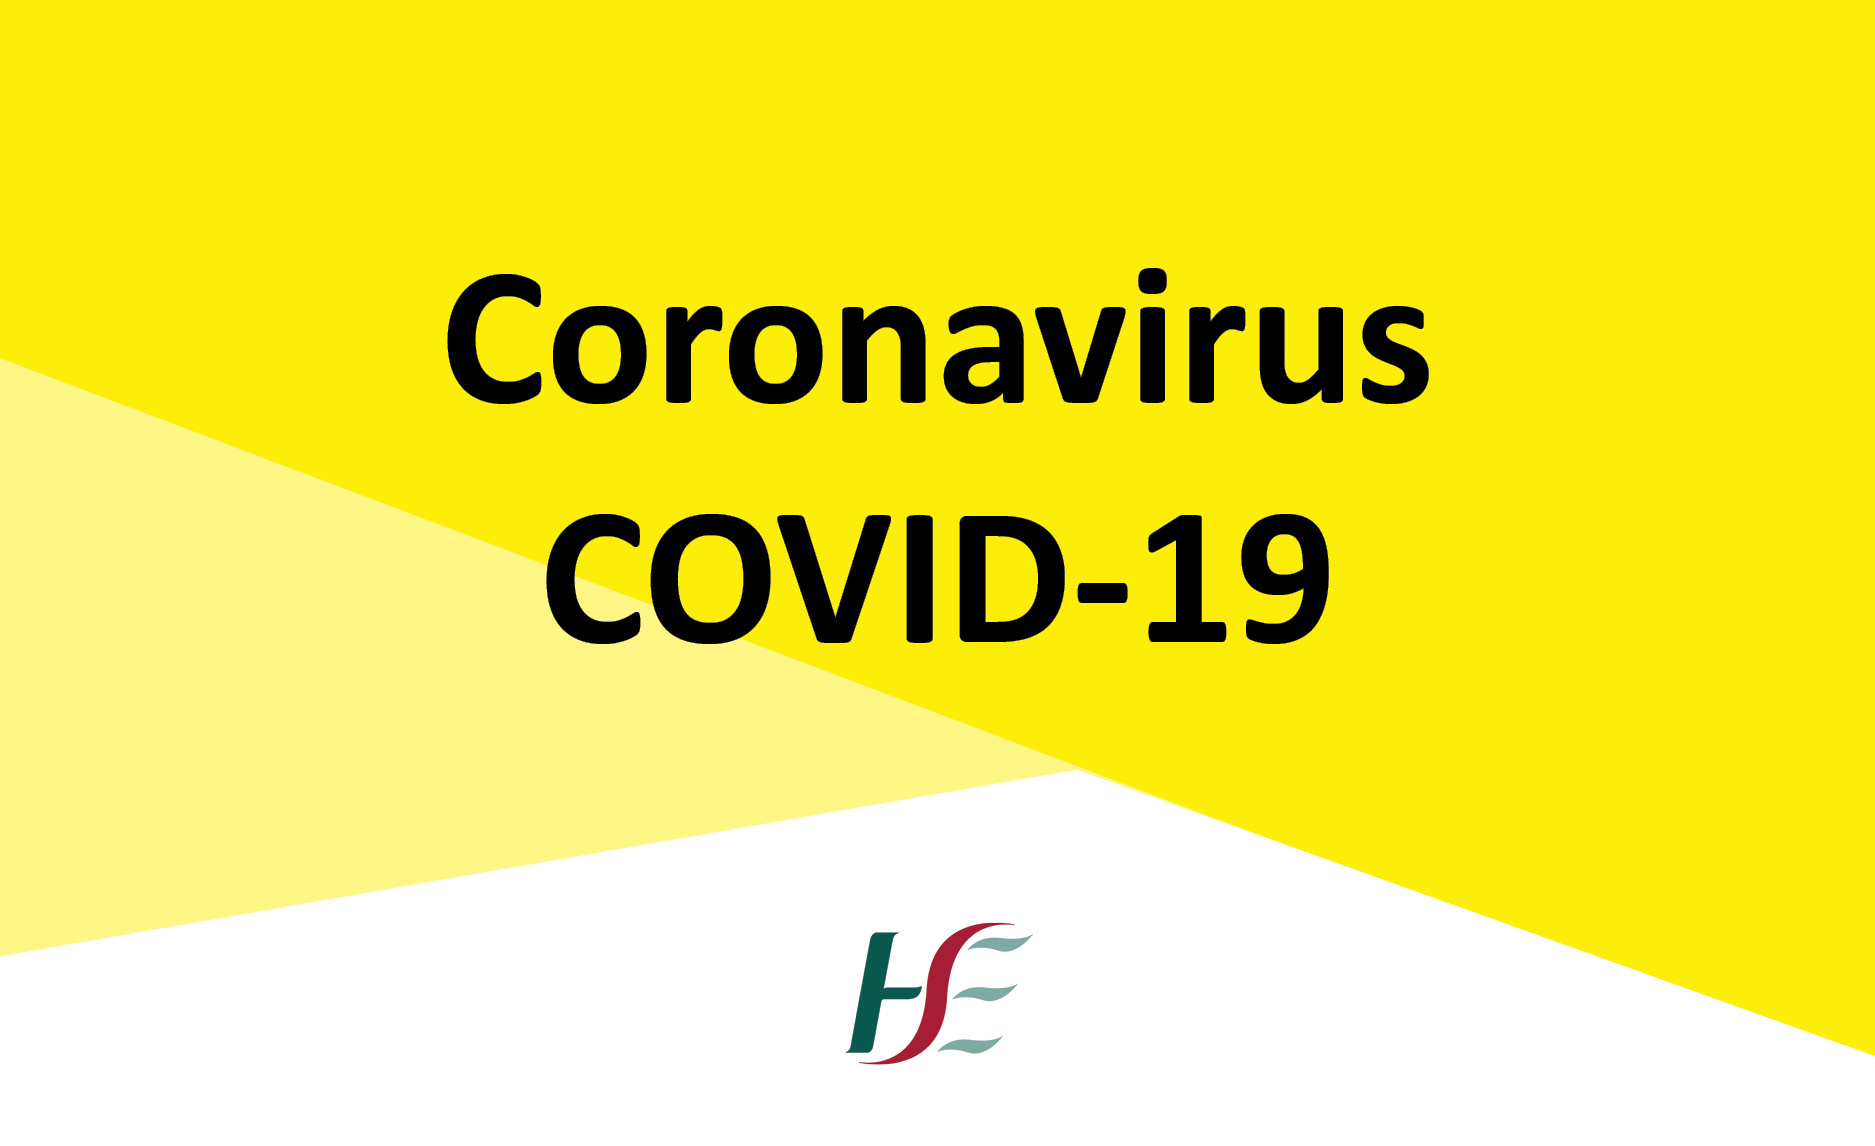 Rollout of COVID-19 vaccines in Ireland